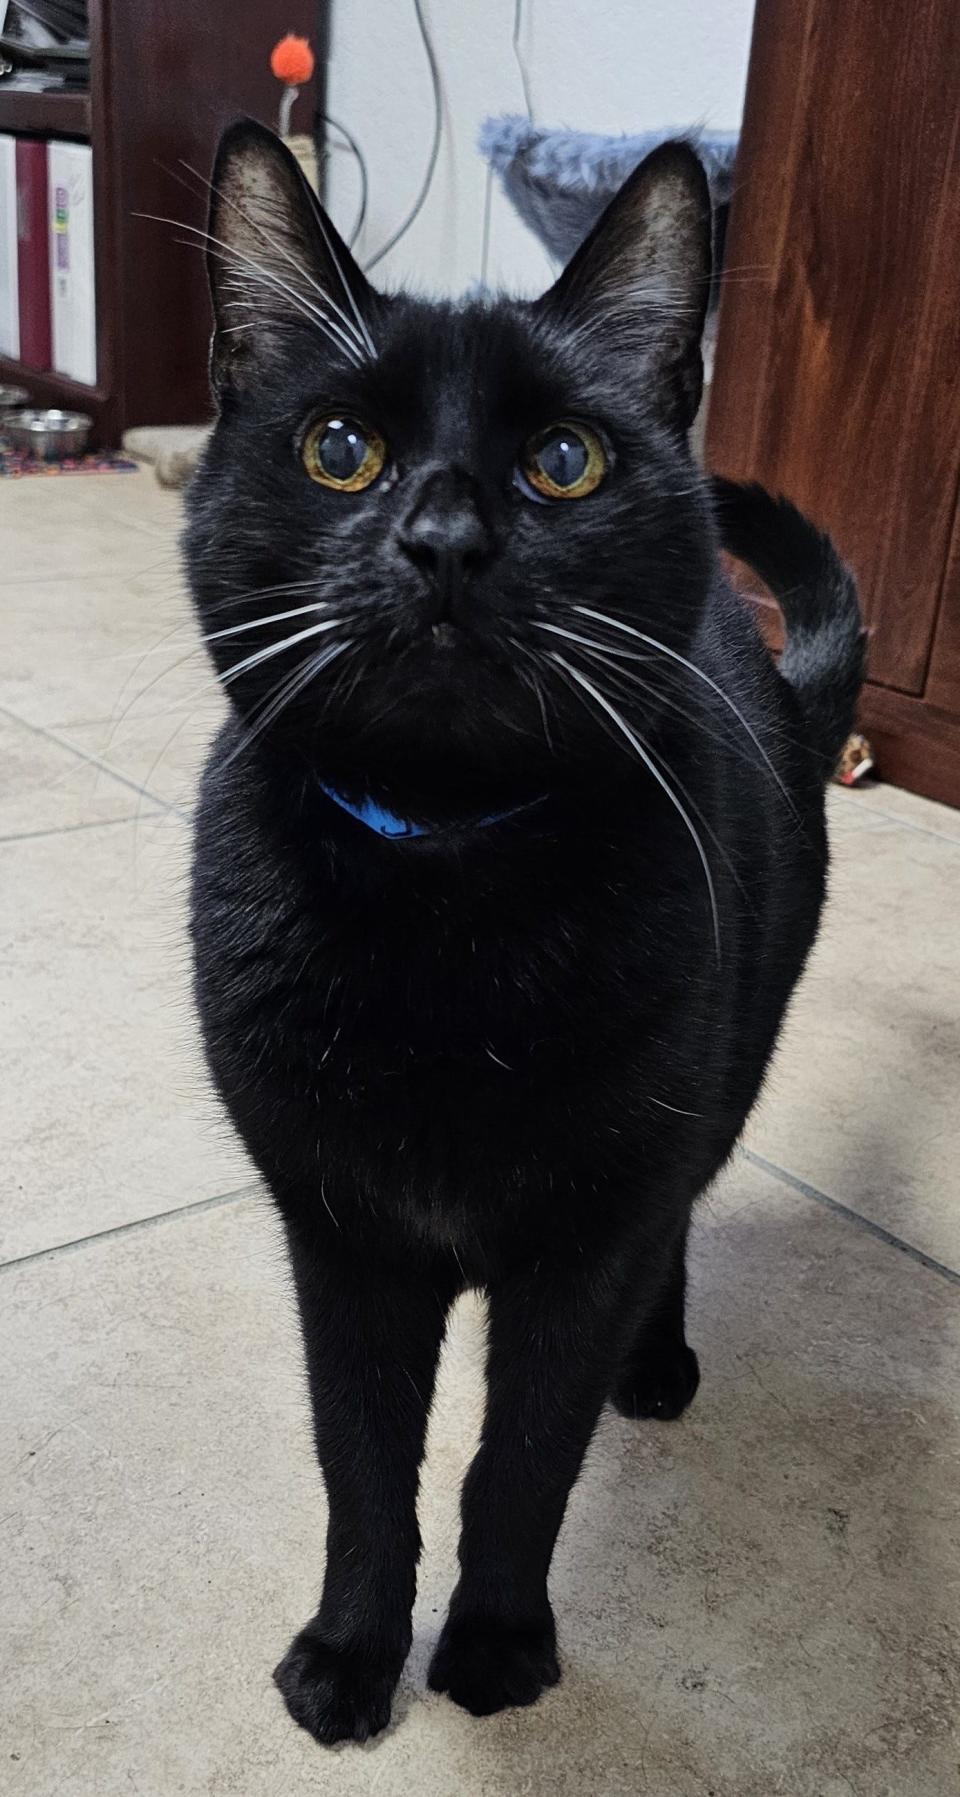 Samba is very affectionate and just loves to be with his humans. His black coat is smooth and shiny. Samba came to us declawed, but that does not stop him from being a normal cat. He is on a special urinary diet that he must keep eating for the rest of his life.